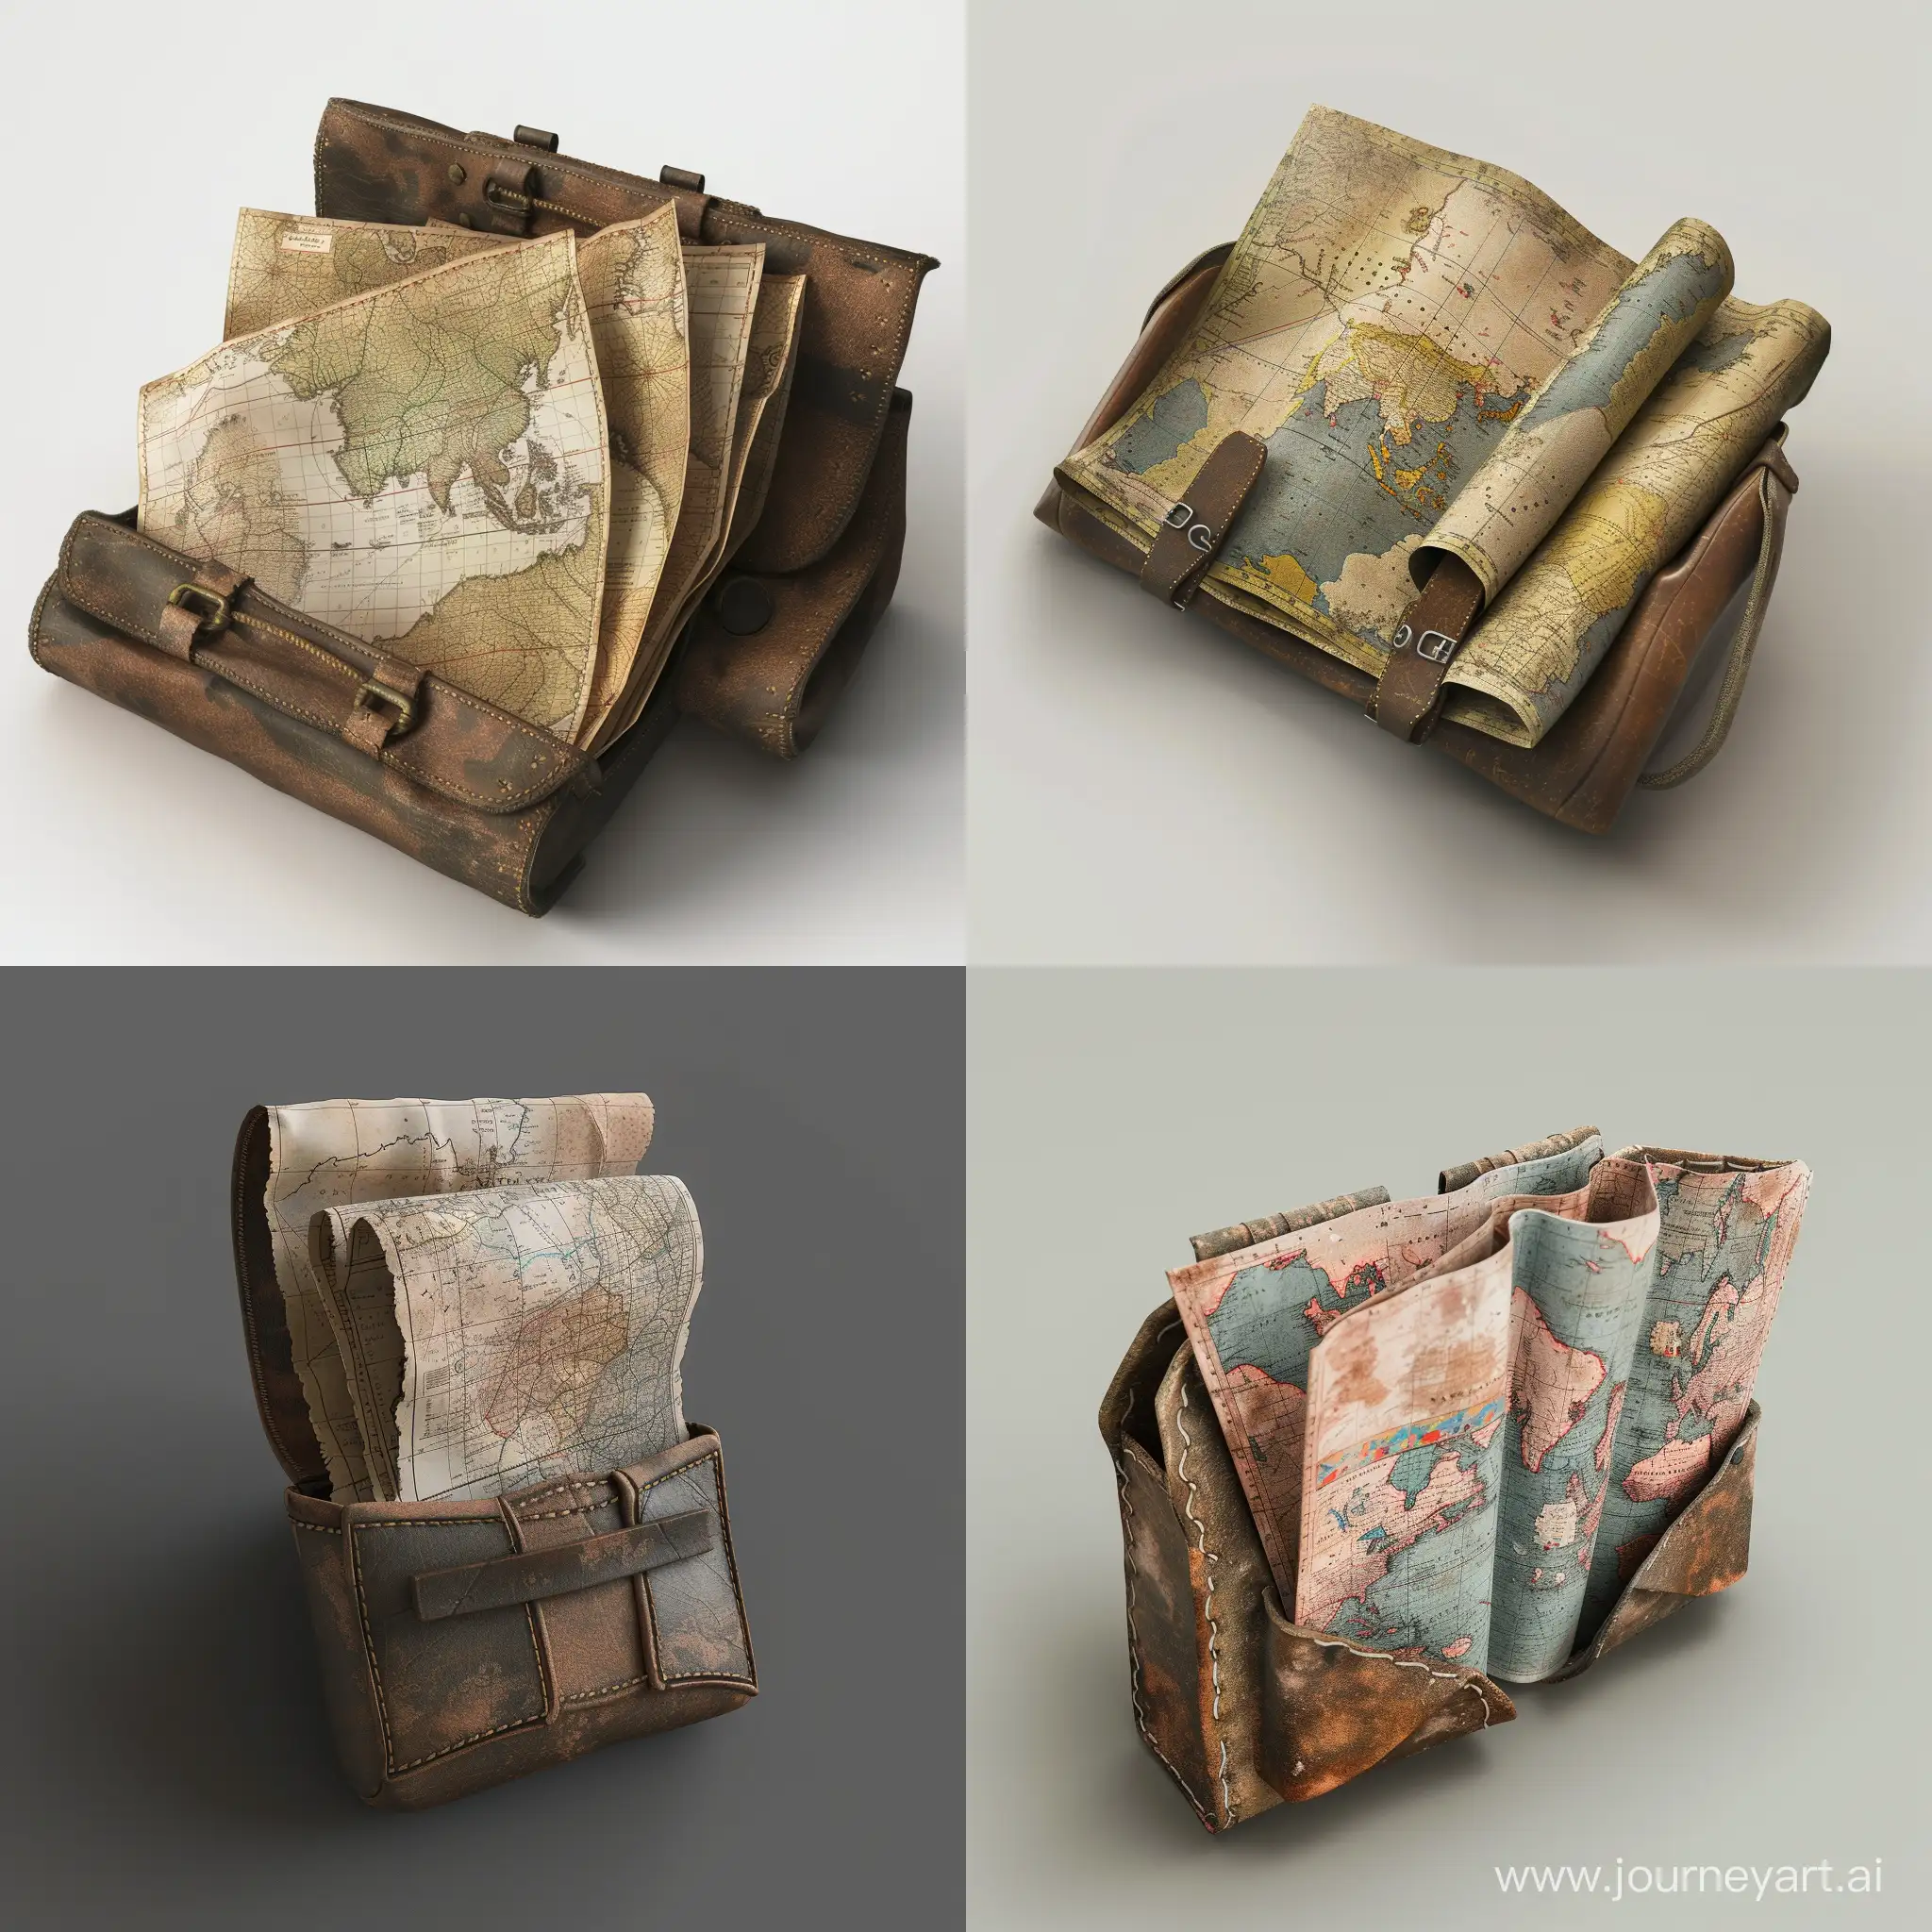 old military maps cartographic folded paper isometric in old small opened military leather pouch realistic 3d render no background